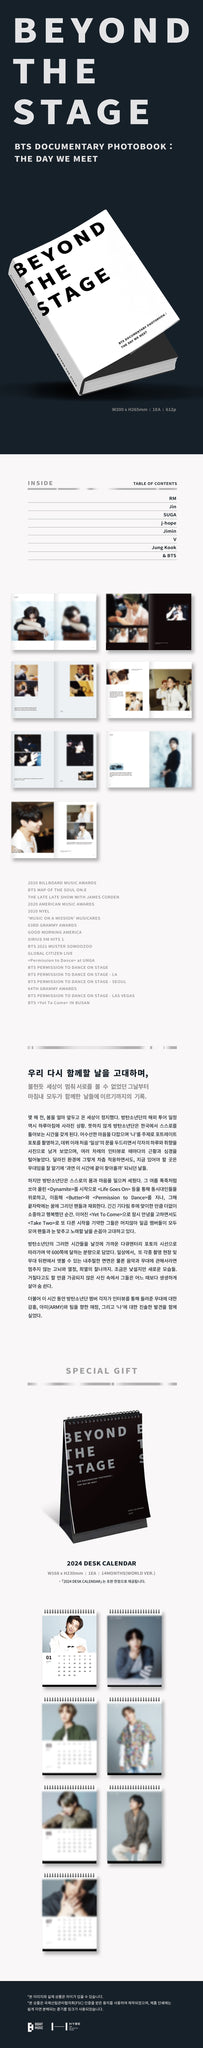 BEYOND THE STAGE’ BTS DOCUMENTARY PHOTOBOOK : THE DAY WE MEET